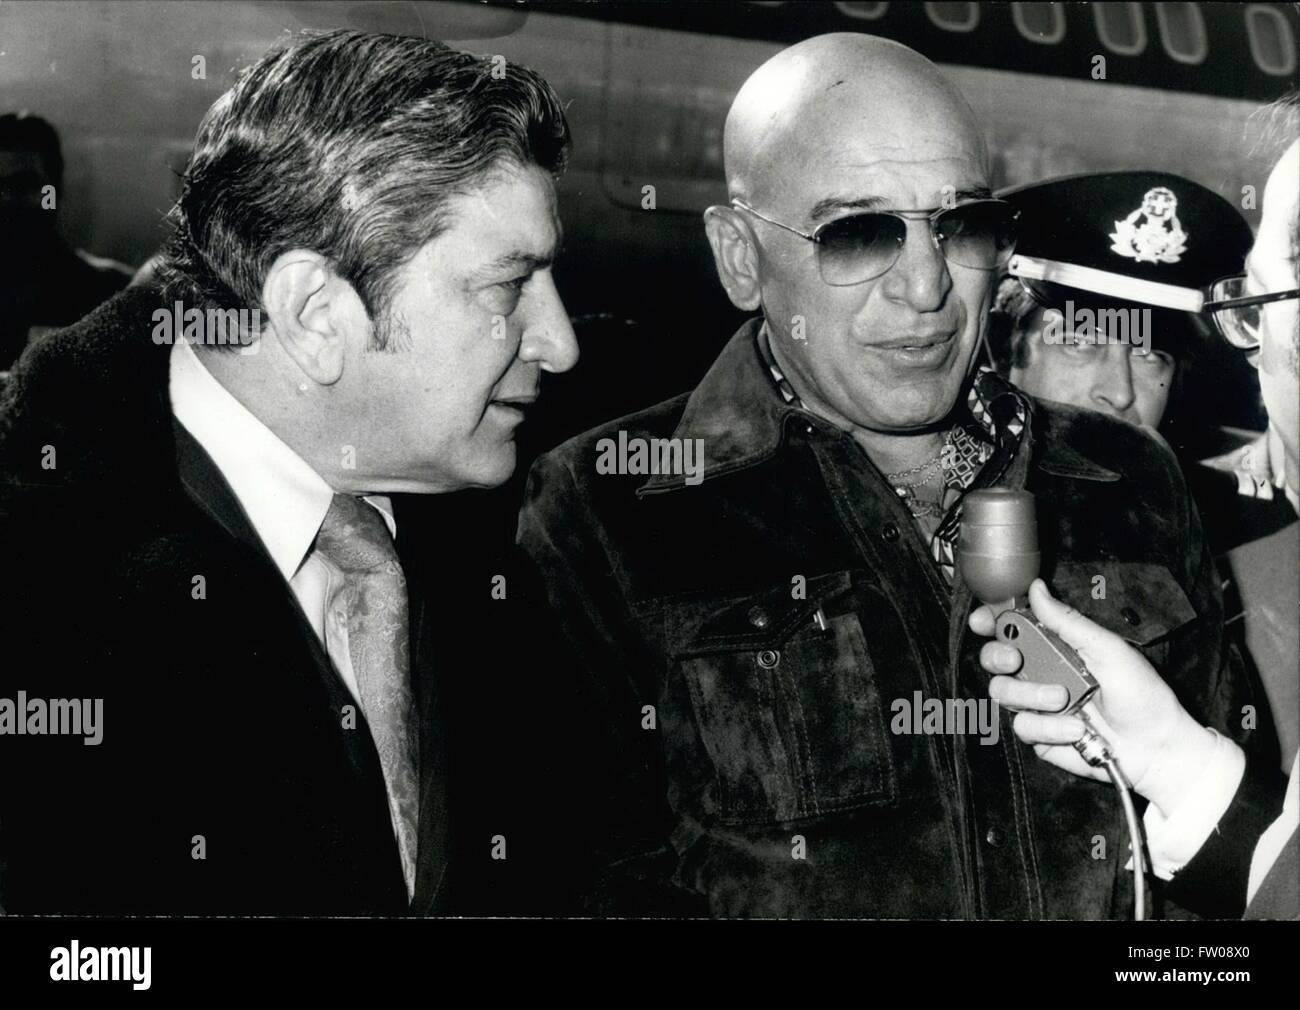 1967 - Telly Savalas with Brother Costas in Athens © Keystone Pictures USA/ZUMAPRESS.com/Alamy Live News Stock Photo